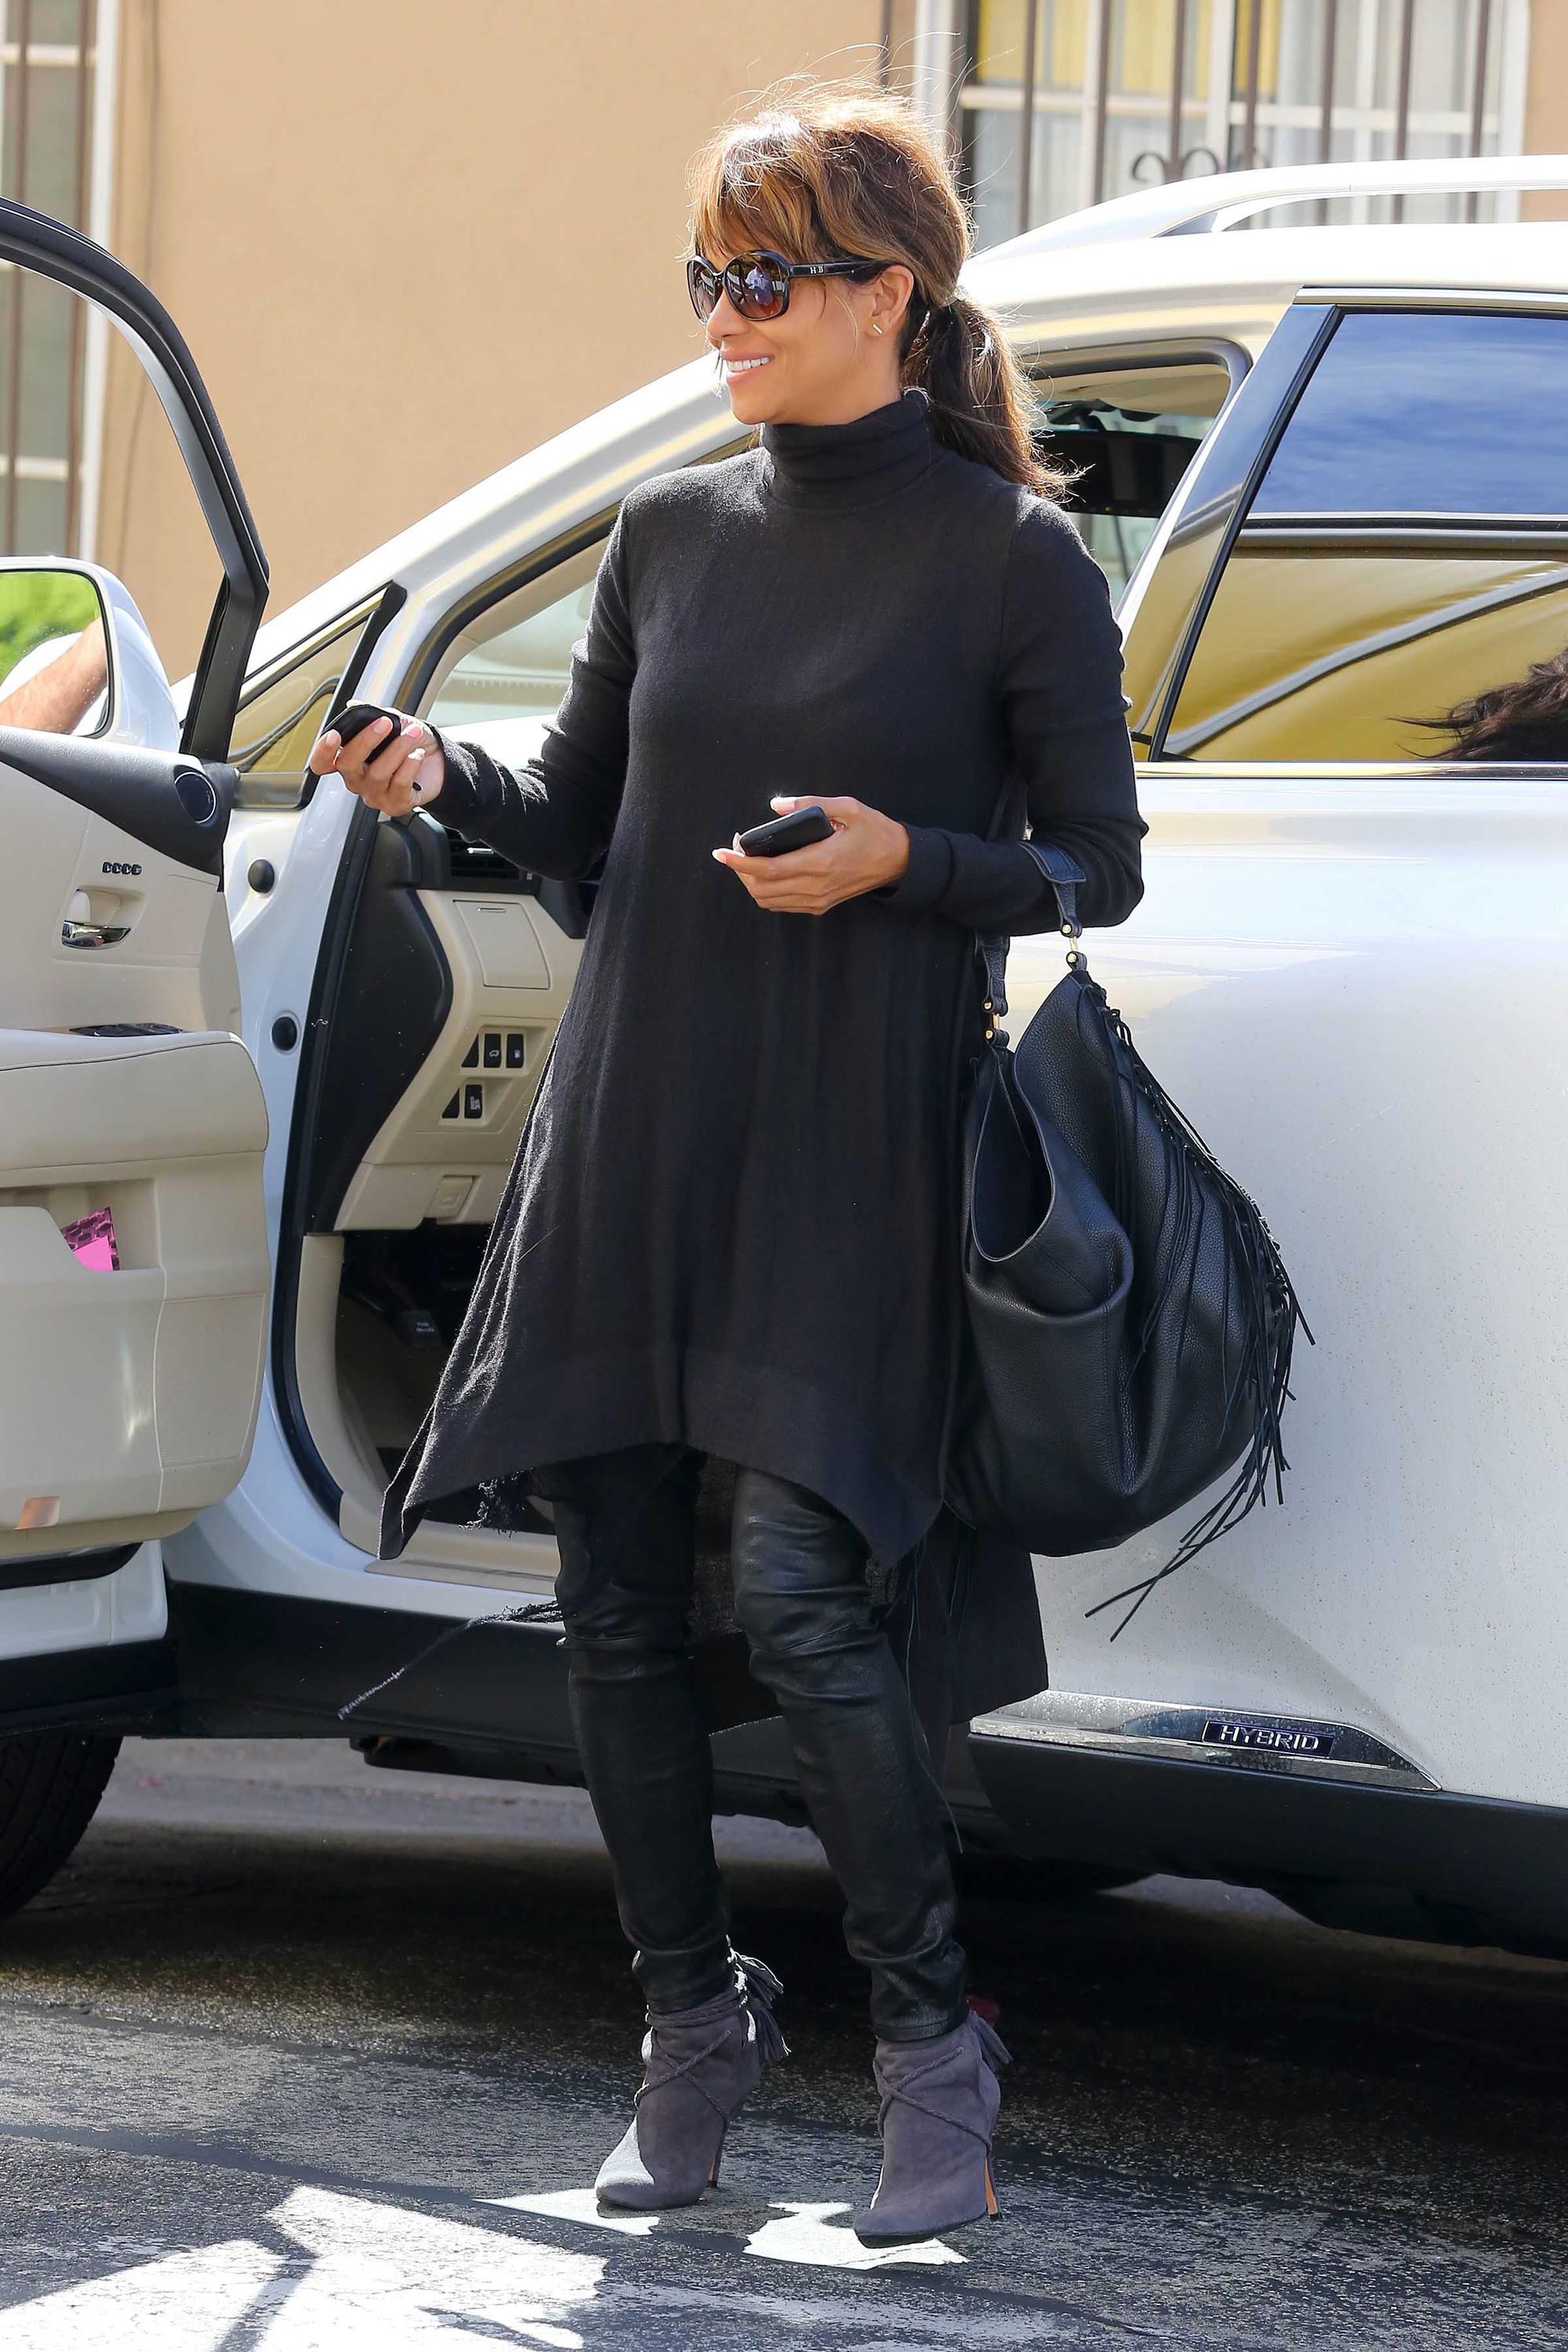 Halle Berry out in Los Angeles